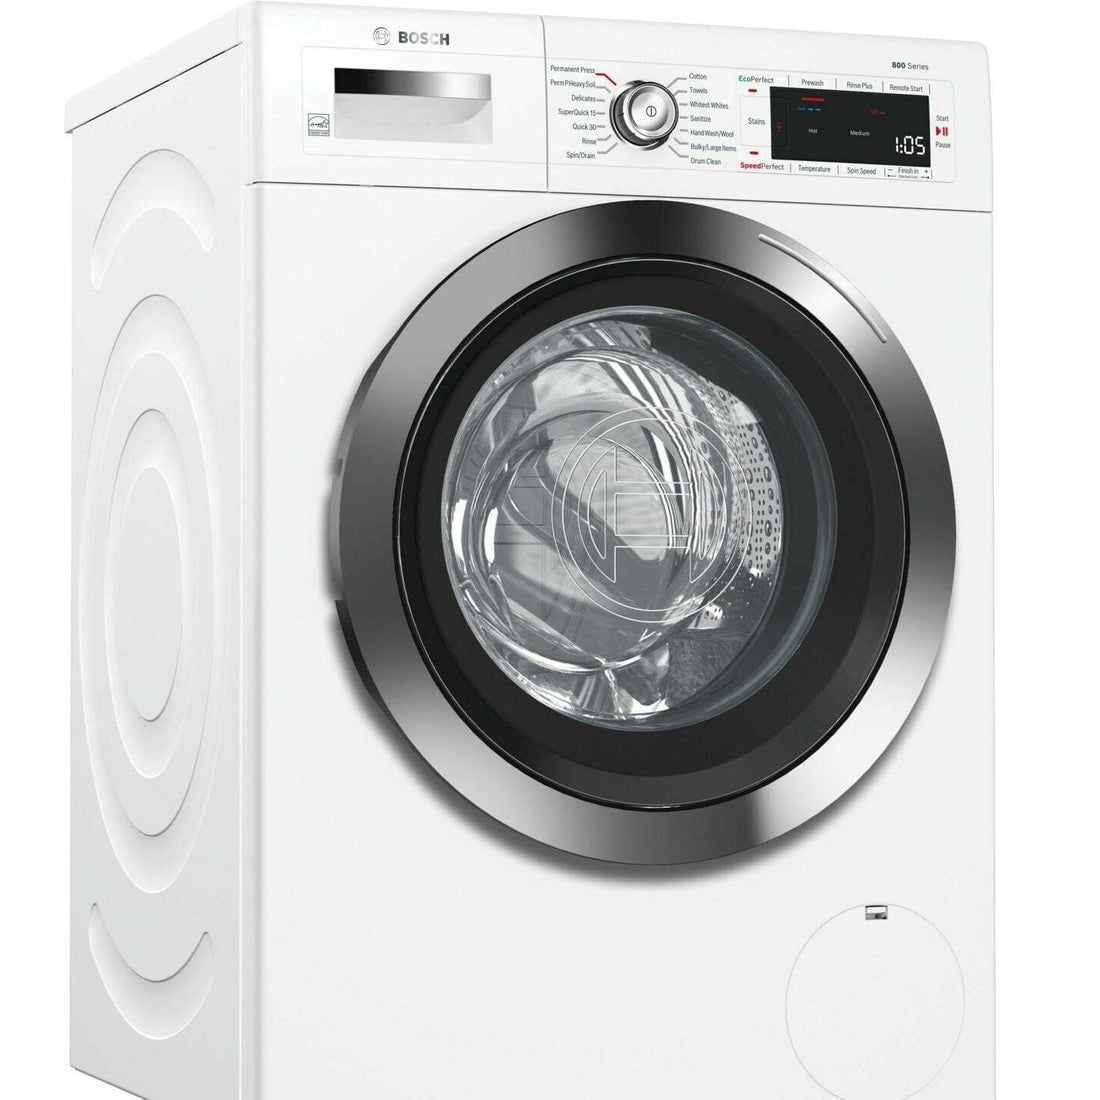 Should You Buy a Bosch WAW285H2UC Laundry Washer?